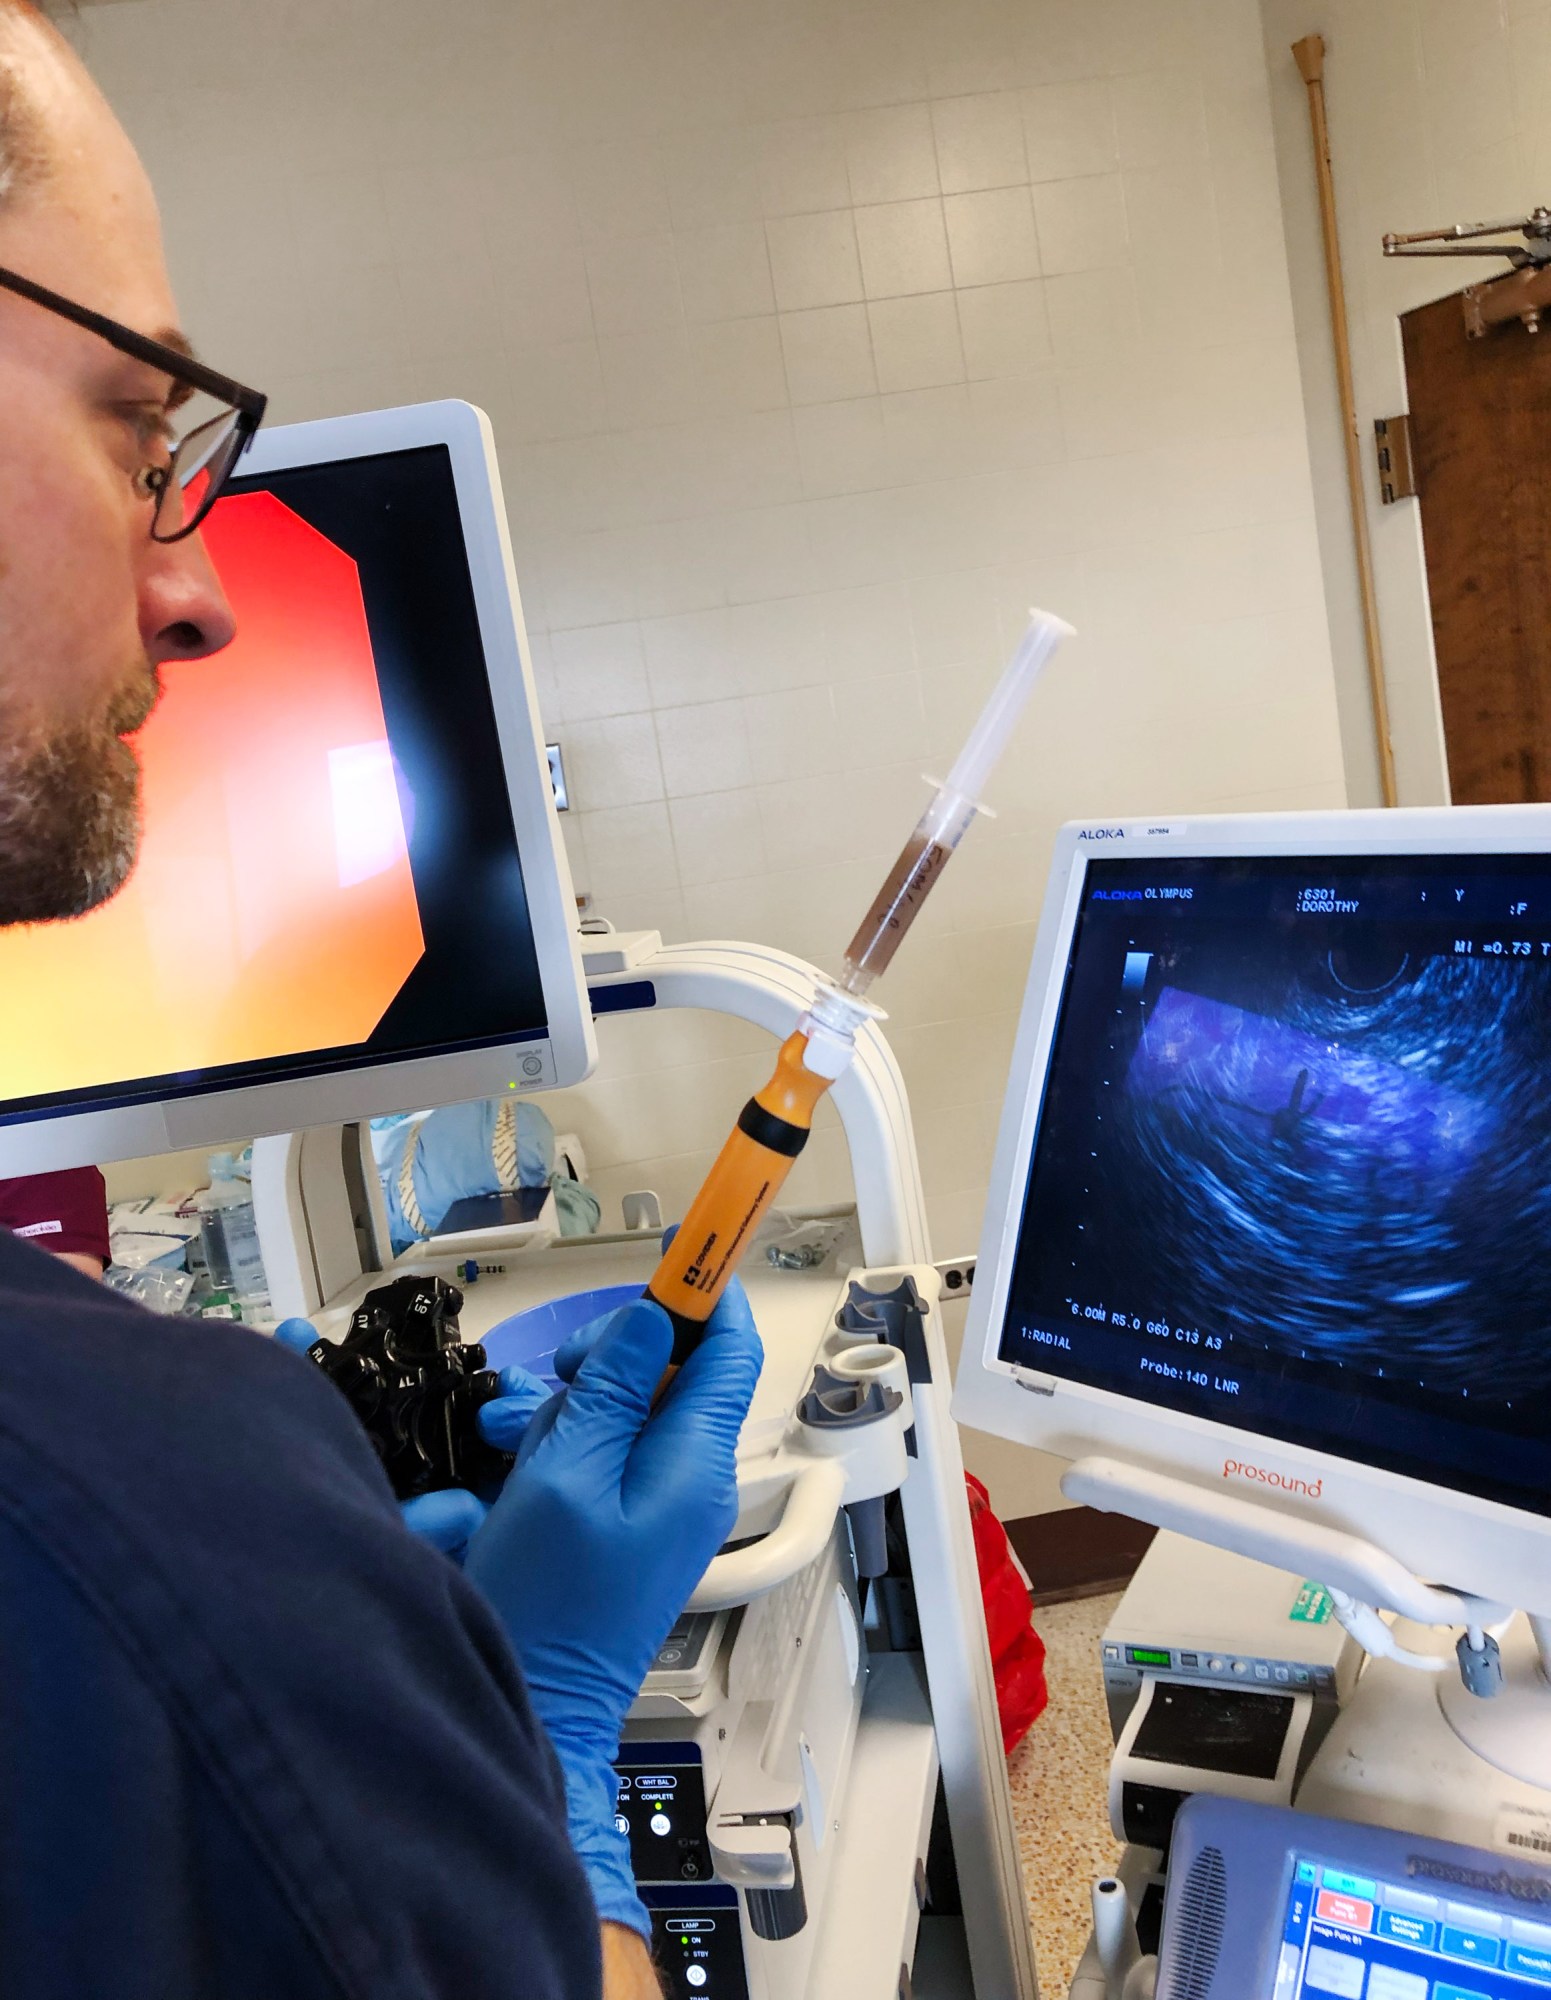 researcher holding a syringe and observing an ultrasound machine